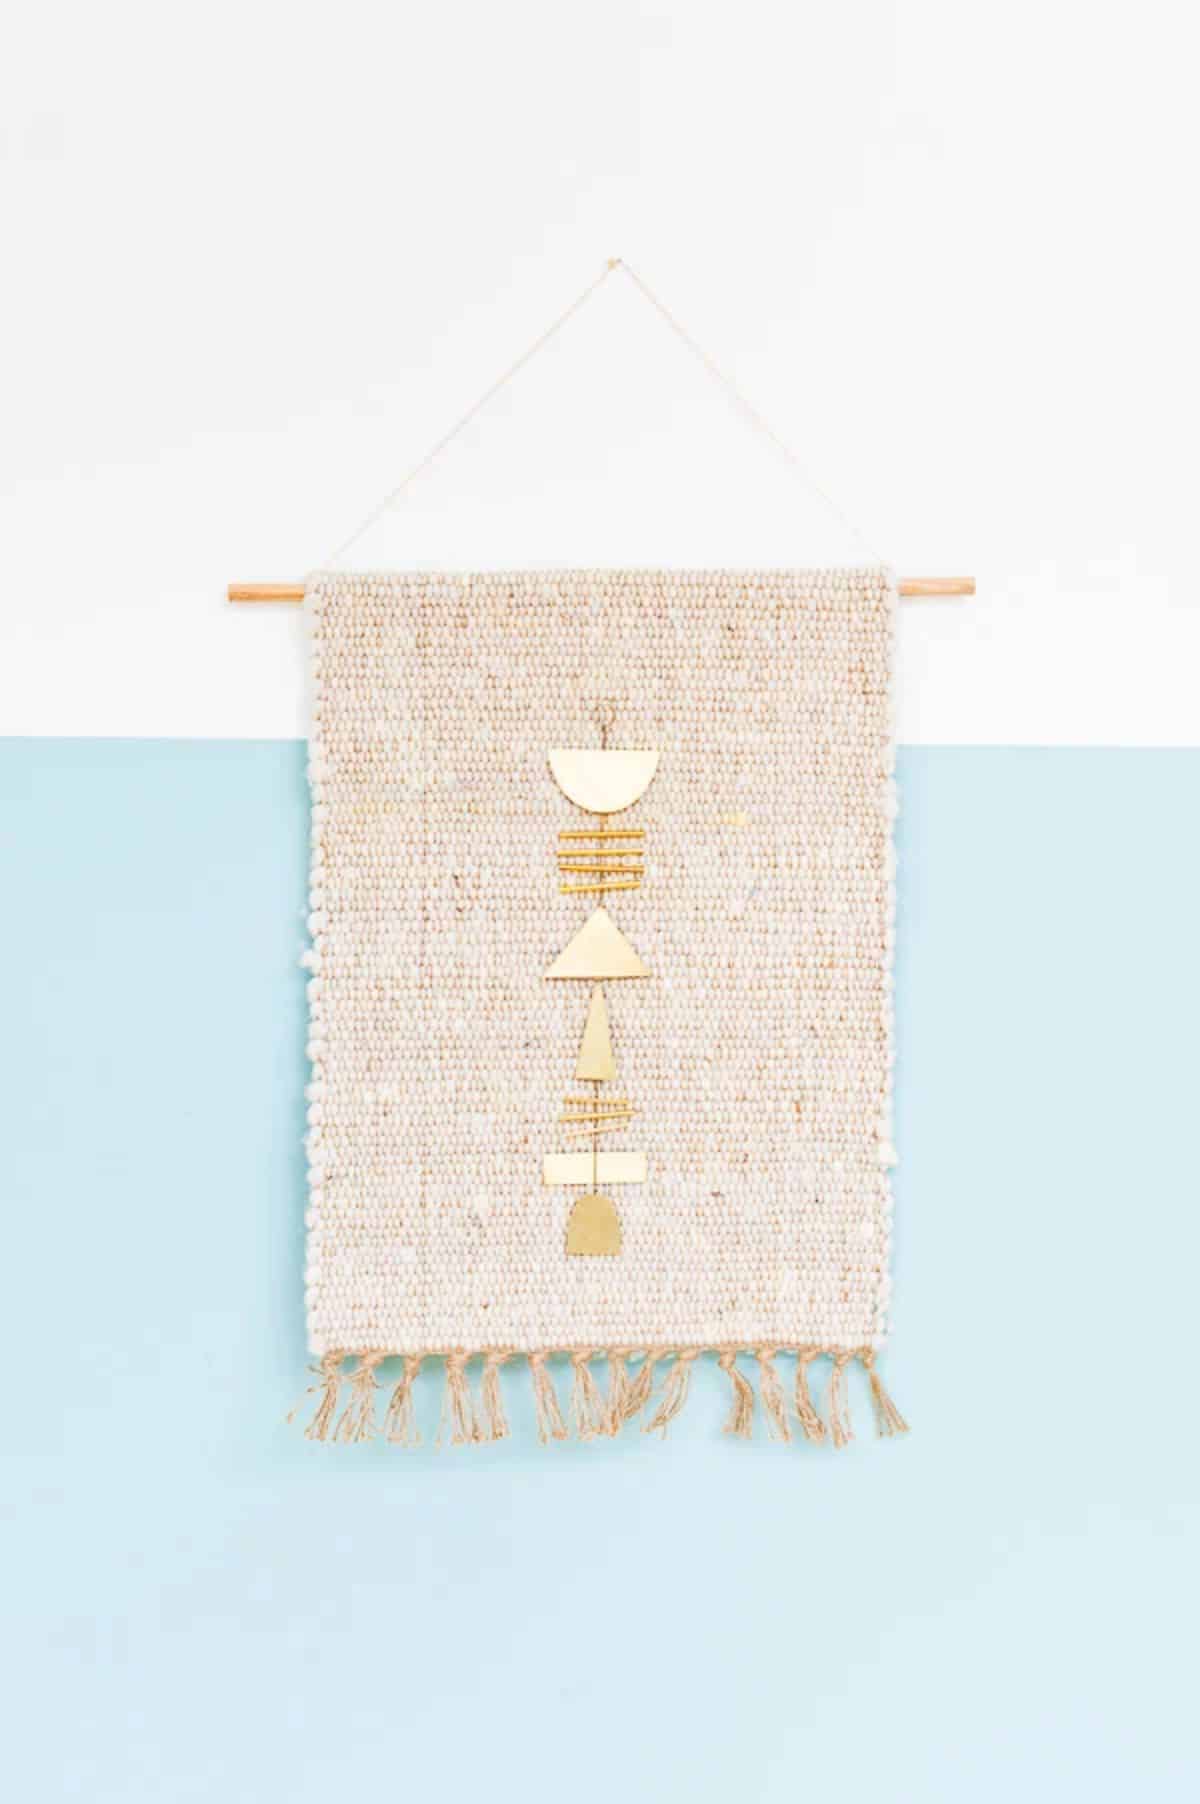 5 Minute Woven Wall Hanging